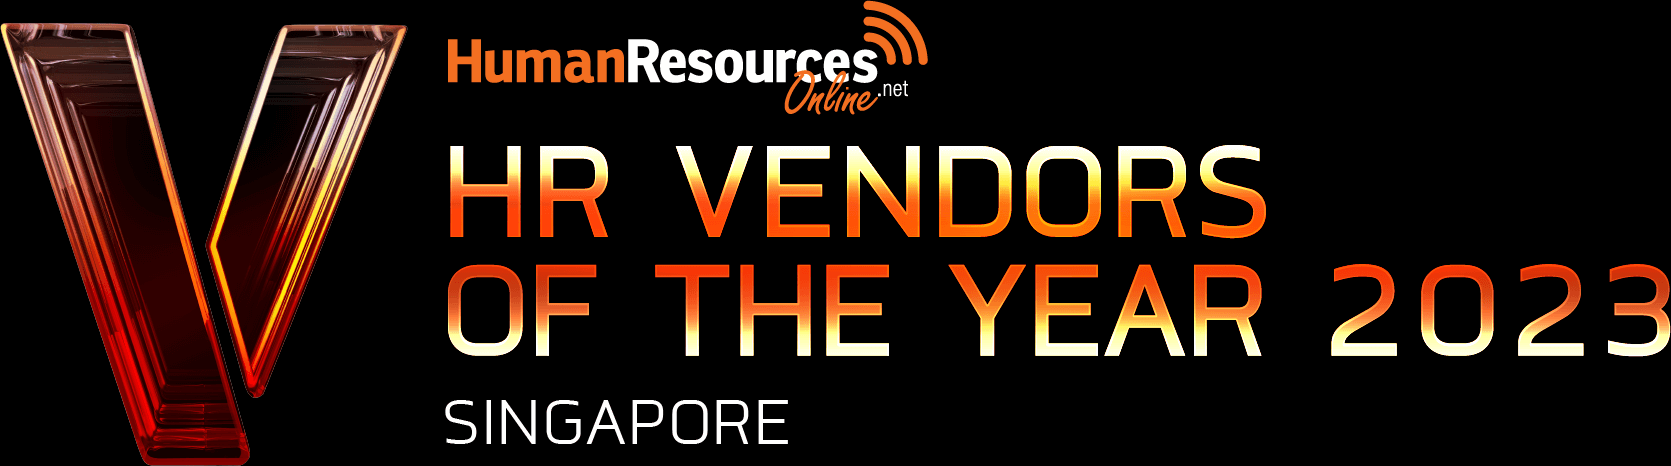 HR Vendors of the Year awards 2023 Singapore